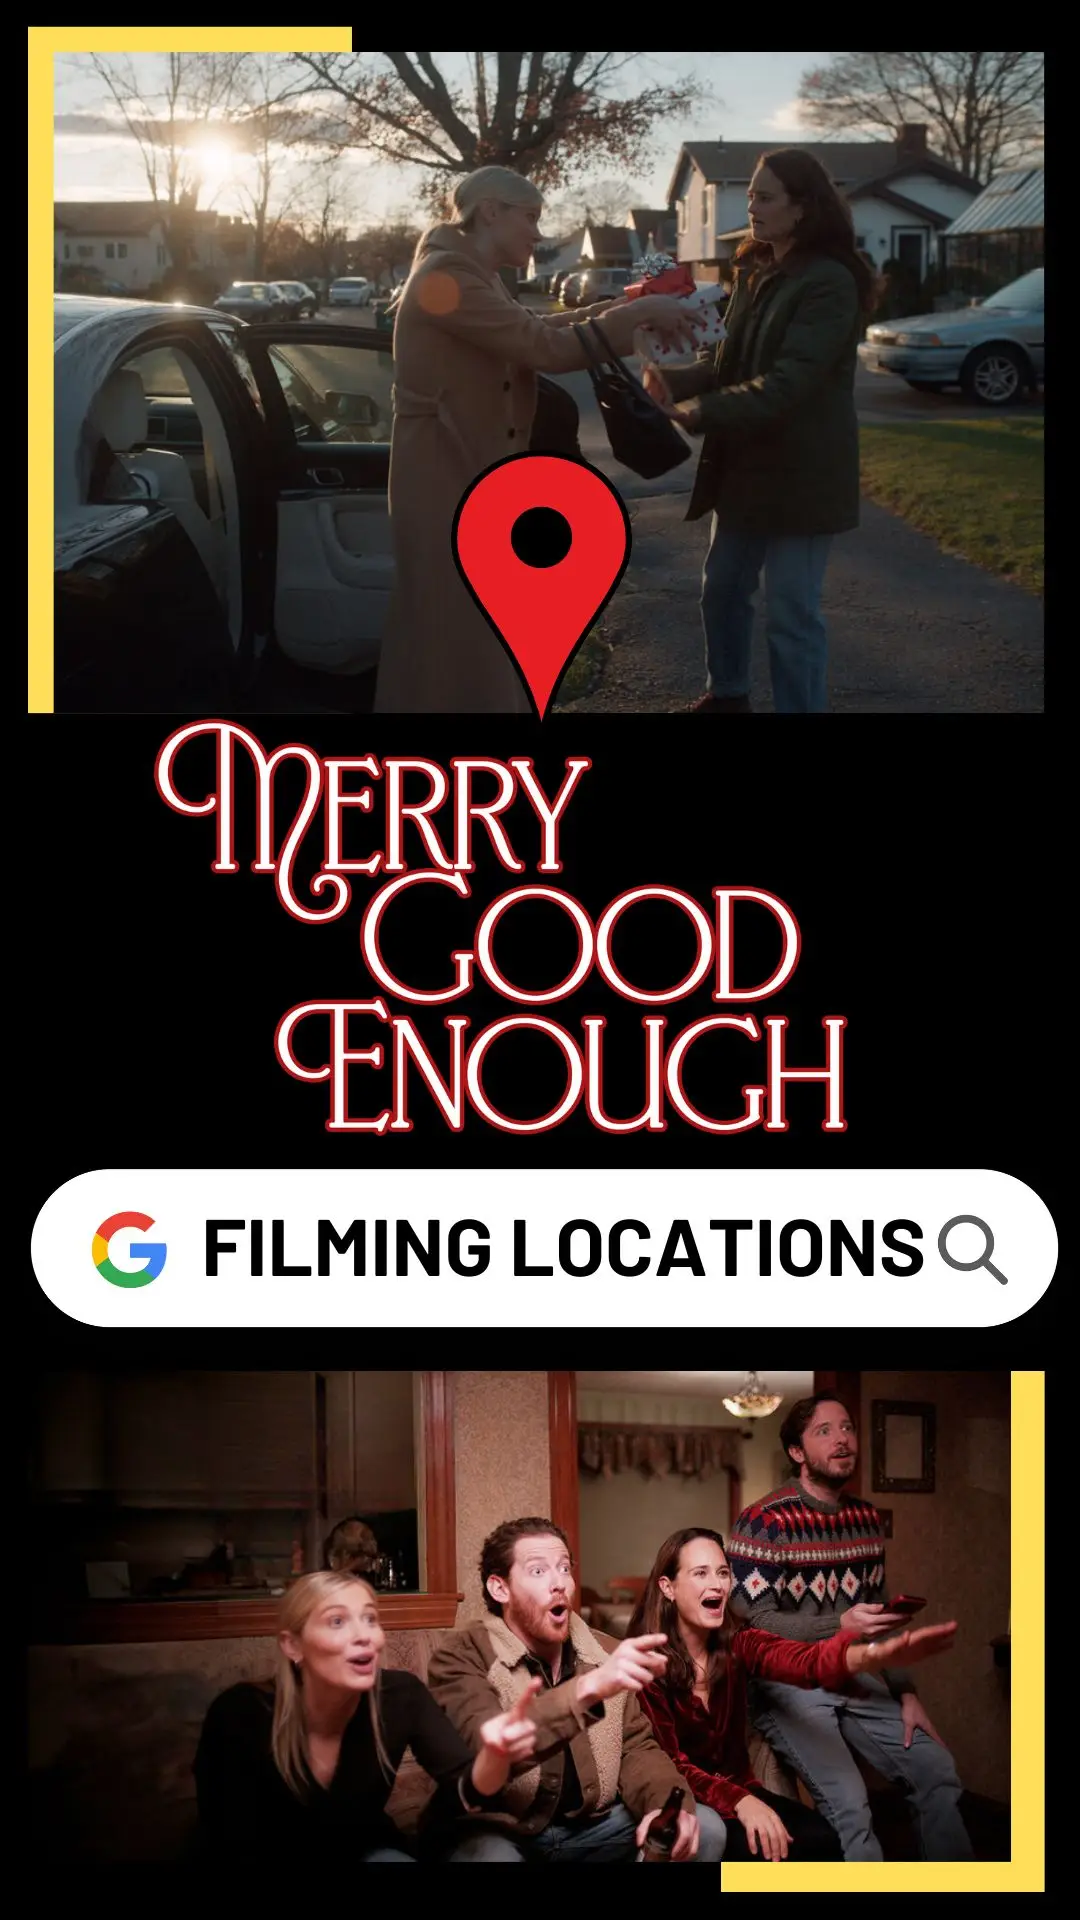 Merry Good Enough Filming Locations